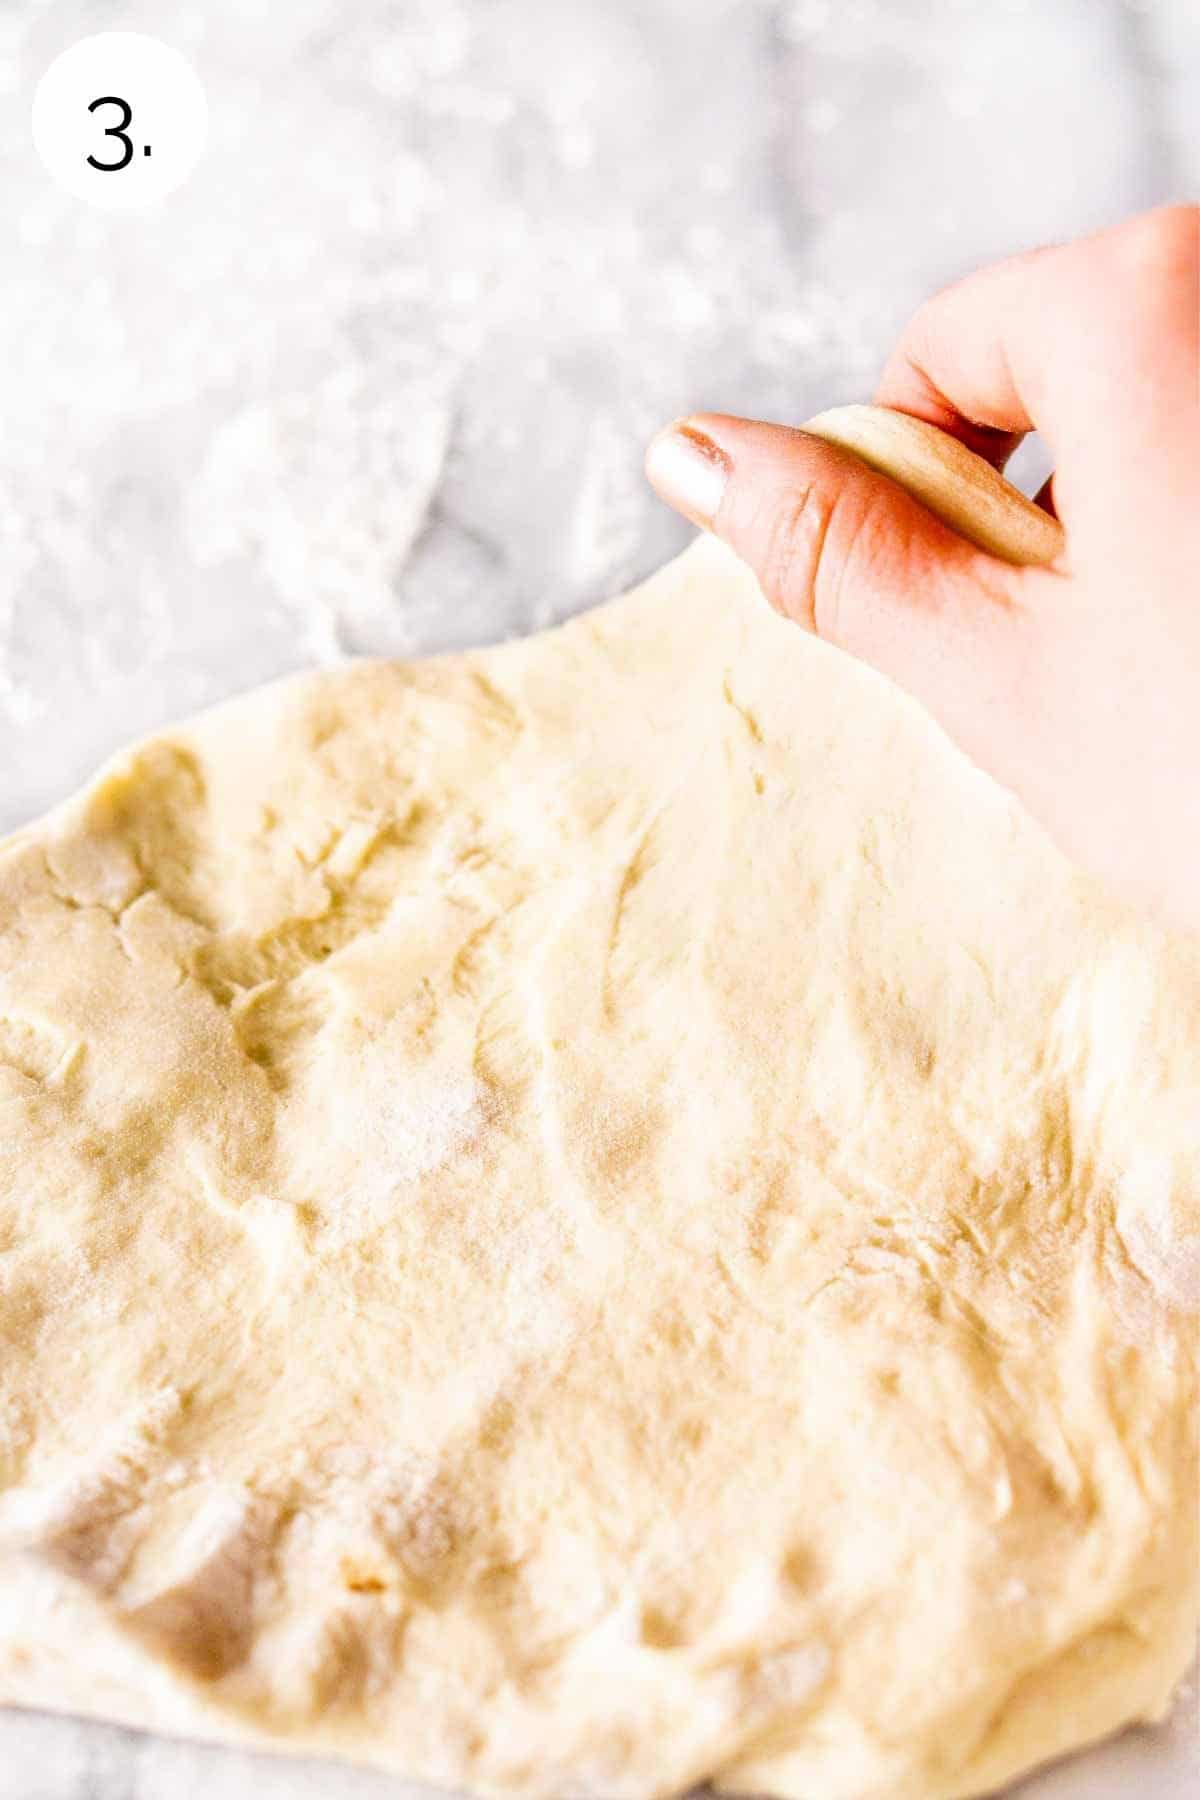 Hand stretching the pizza dough on a floured countertop.